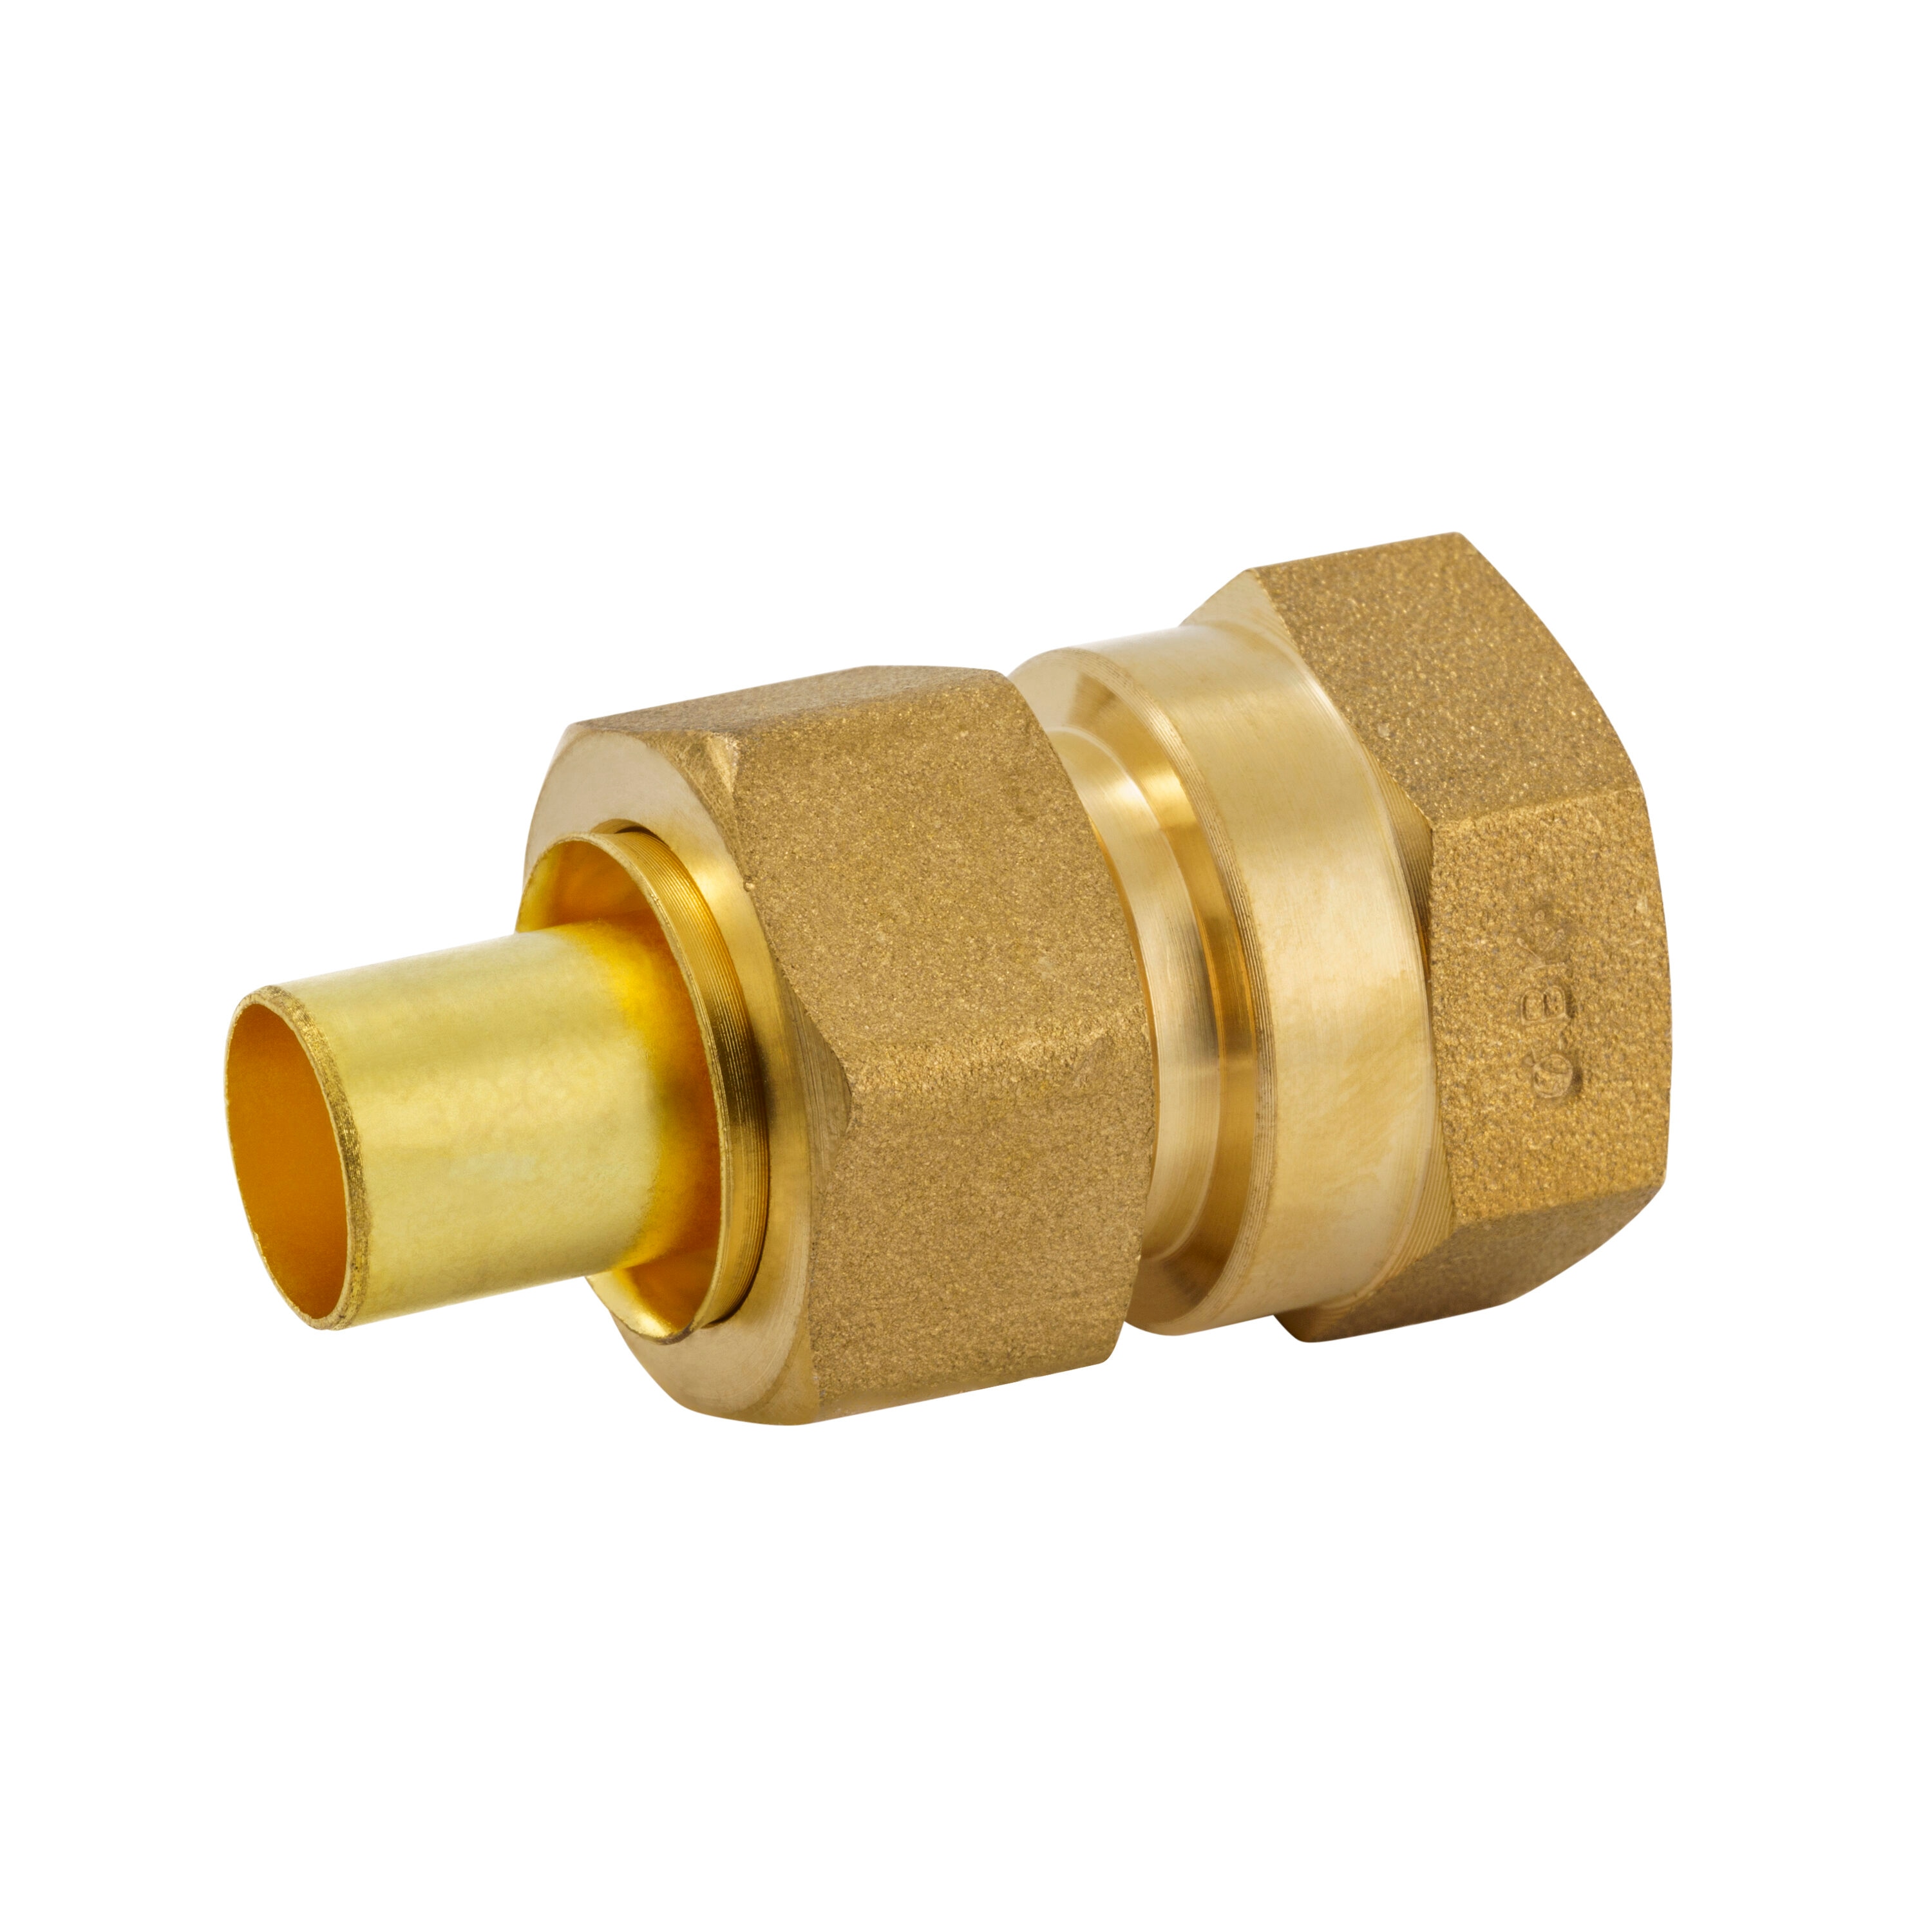 Pipe Connection Fittings, Coupling Fitting, 2.5 Inch Thread